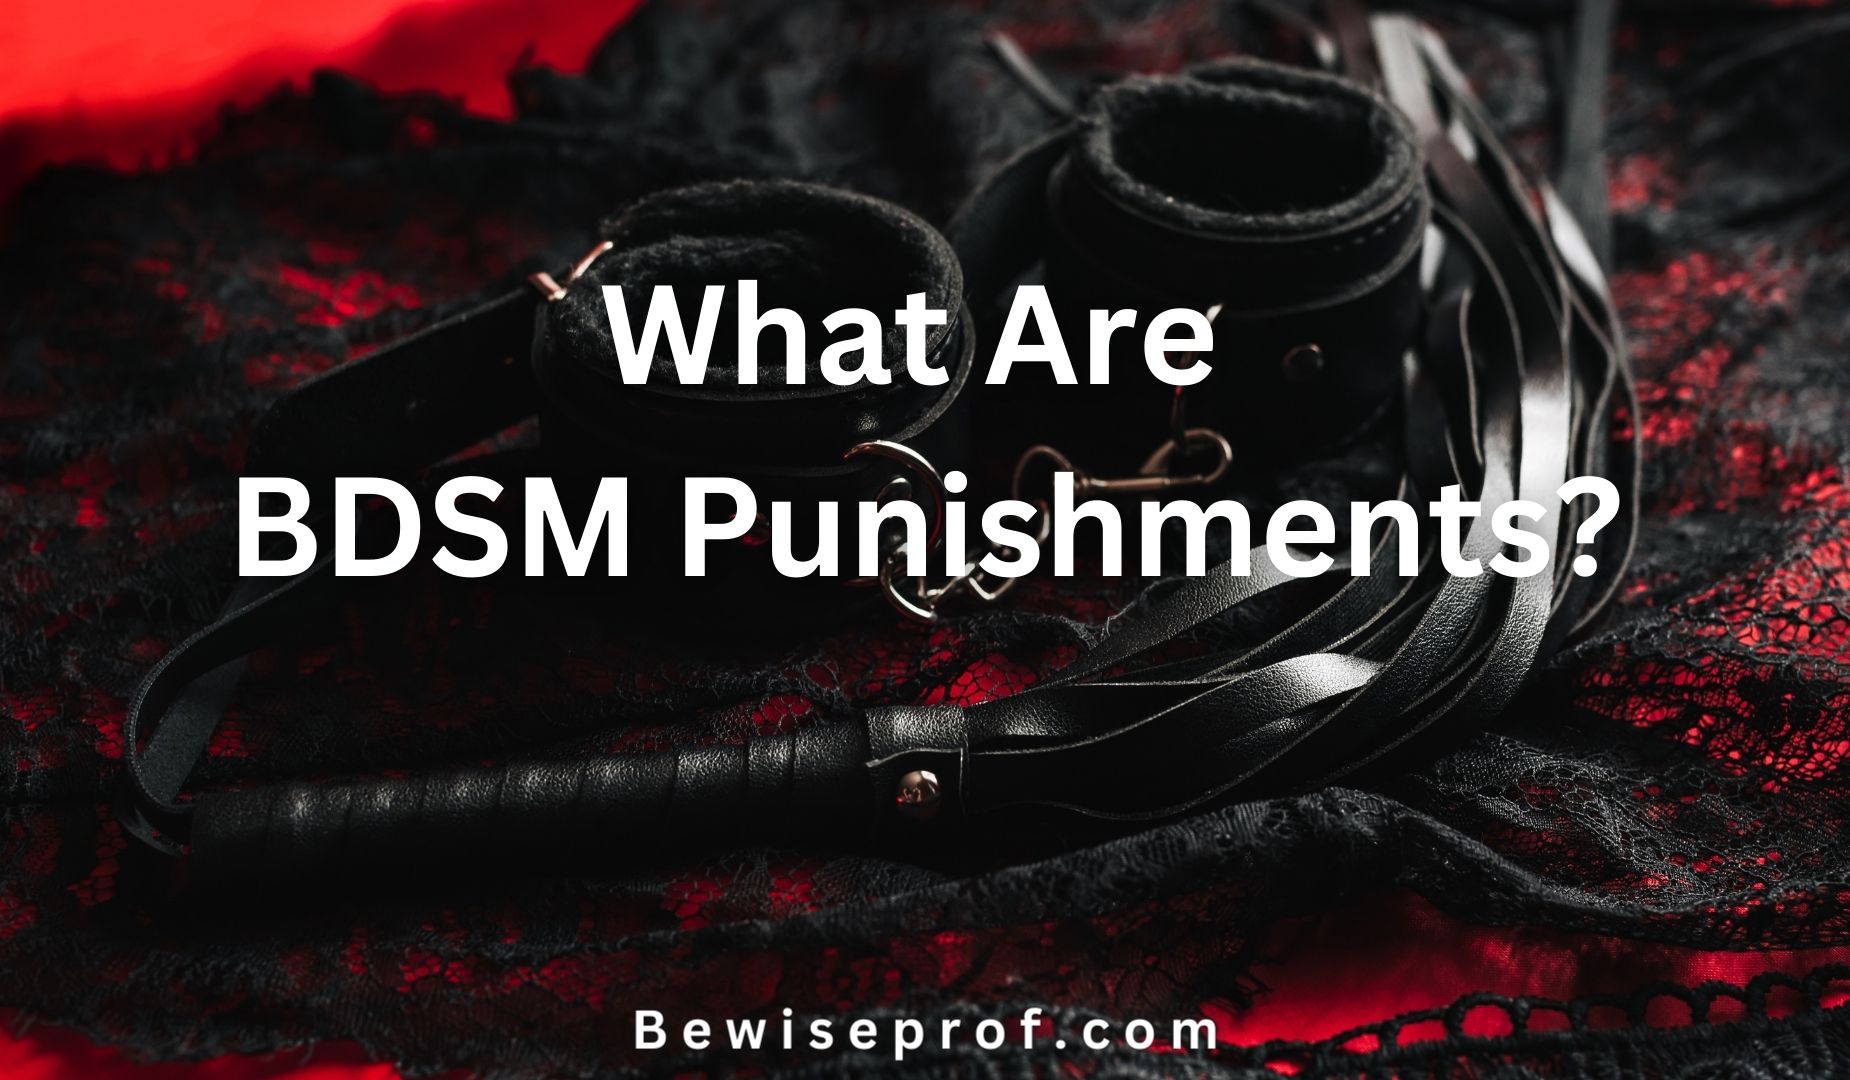 What Are BDSM Punishments?